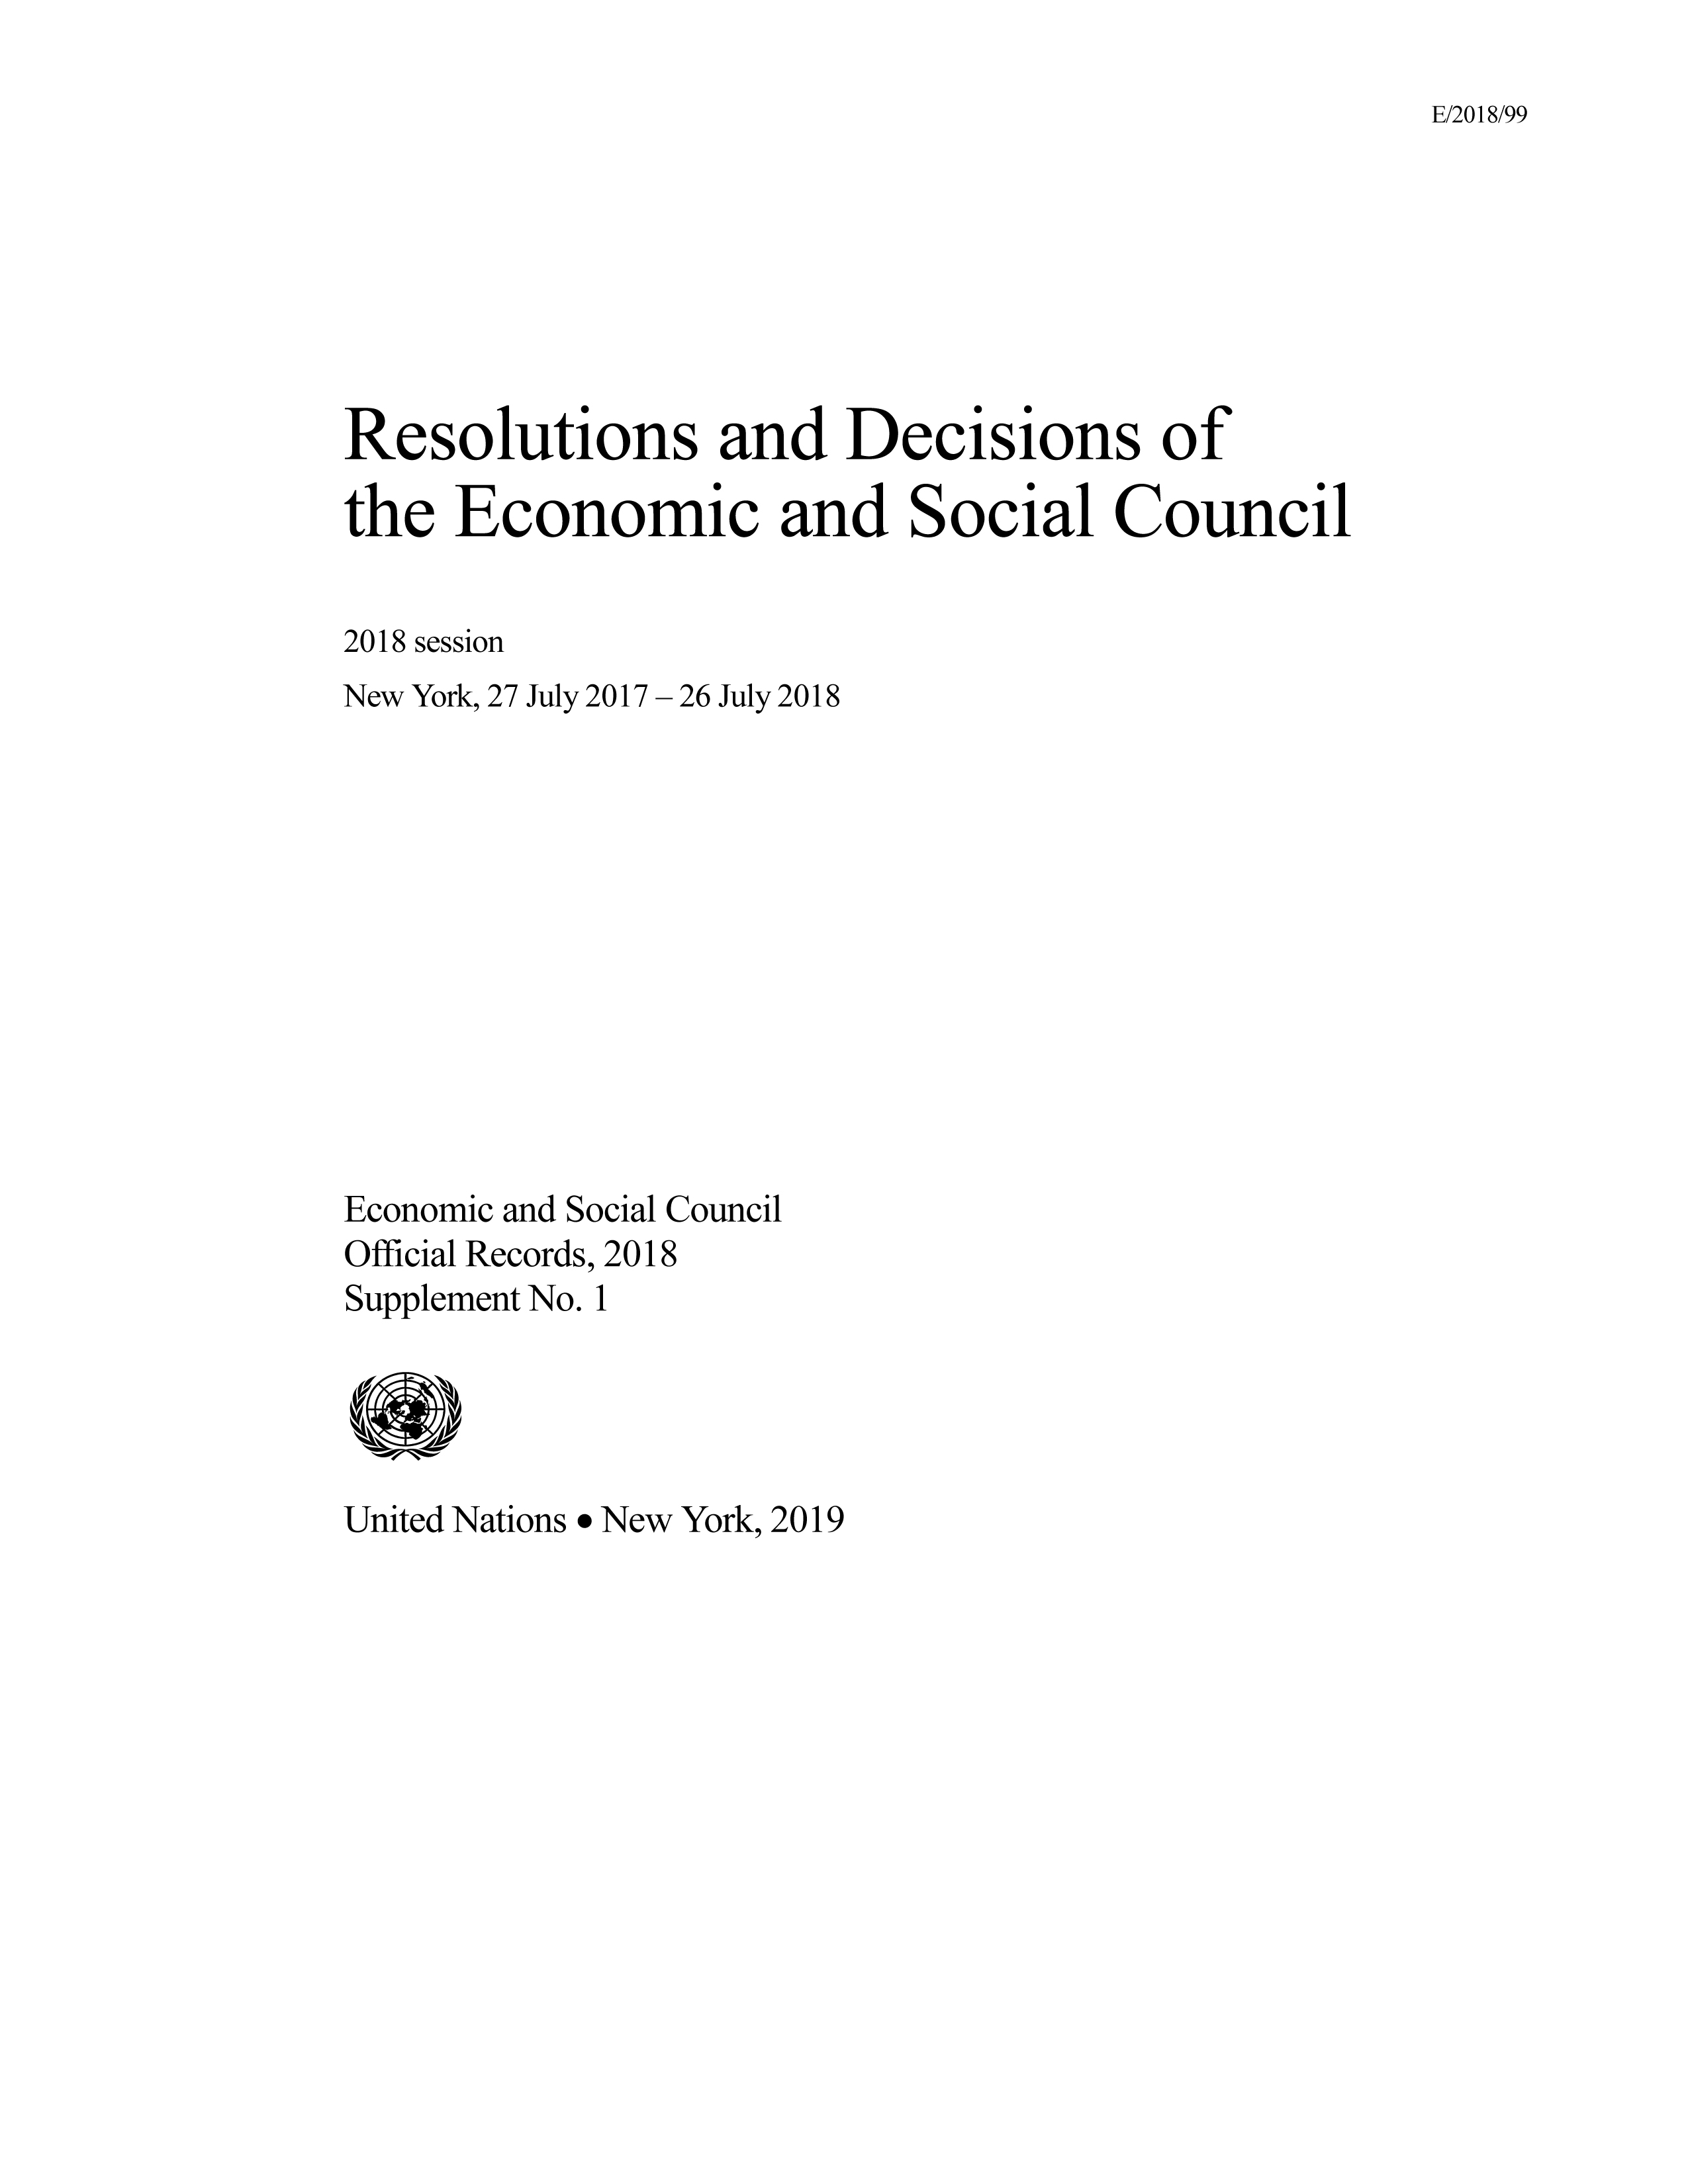 image of Resolutions and Decisions of the Economic and Social Council: 2018 Session